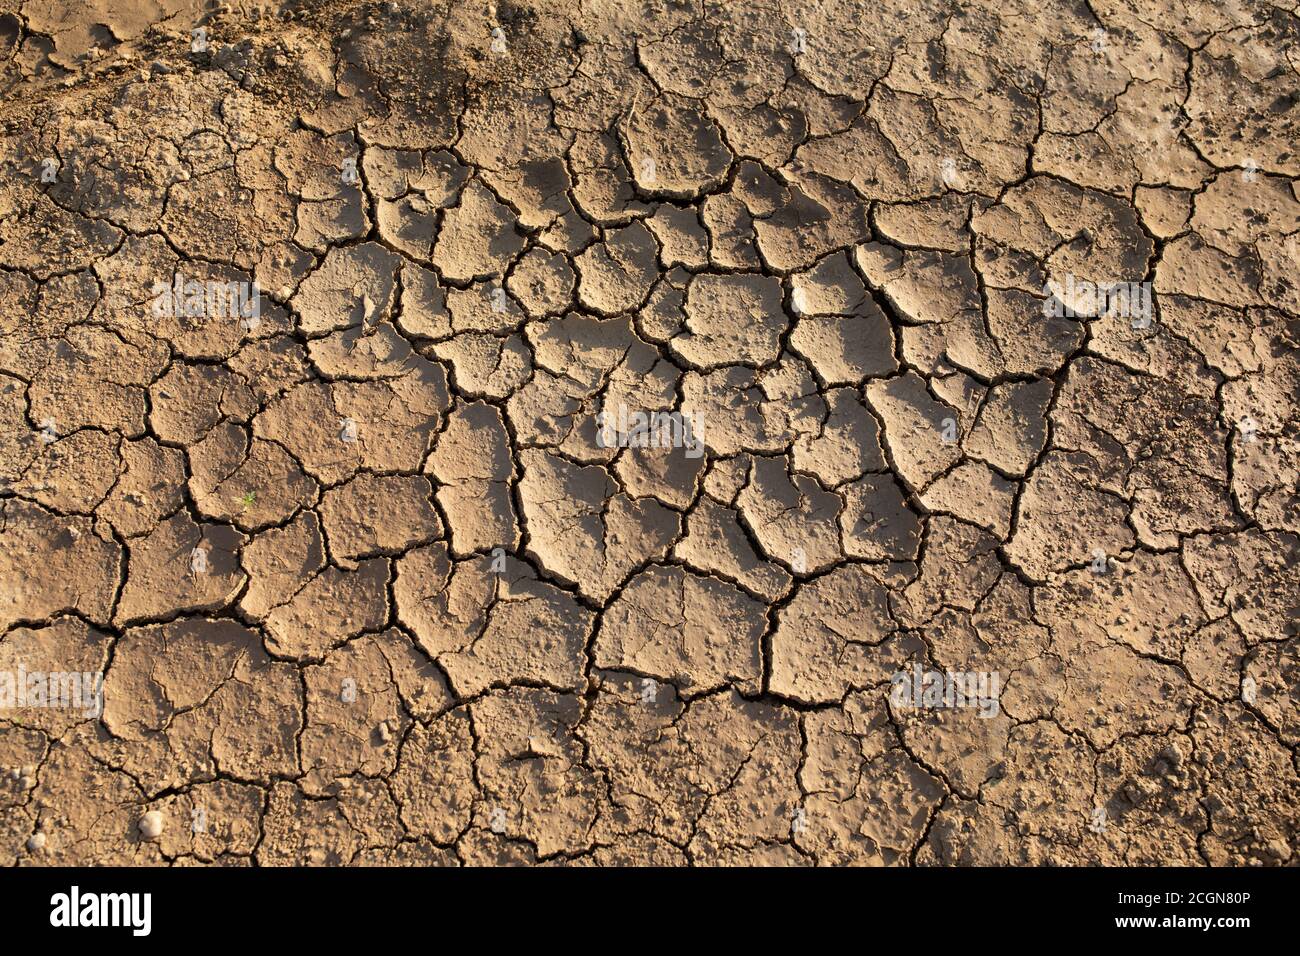 Dry cracked desert. The global shortage of water on the planet. Global warming and greenhouse effect illustration. Stock Photo